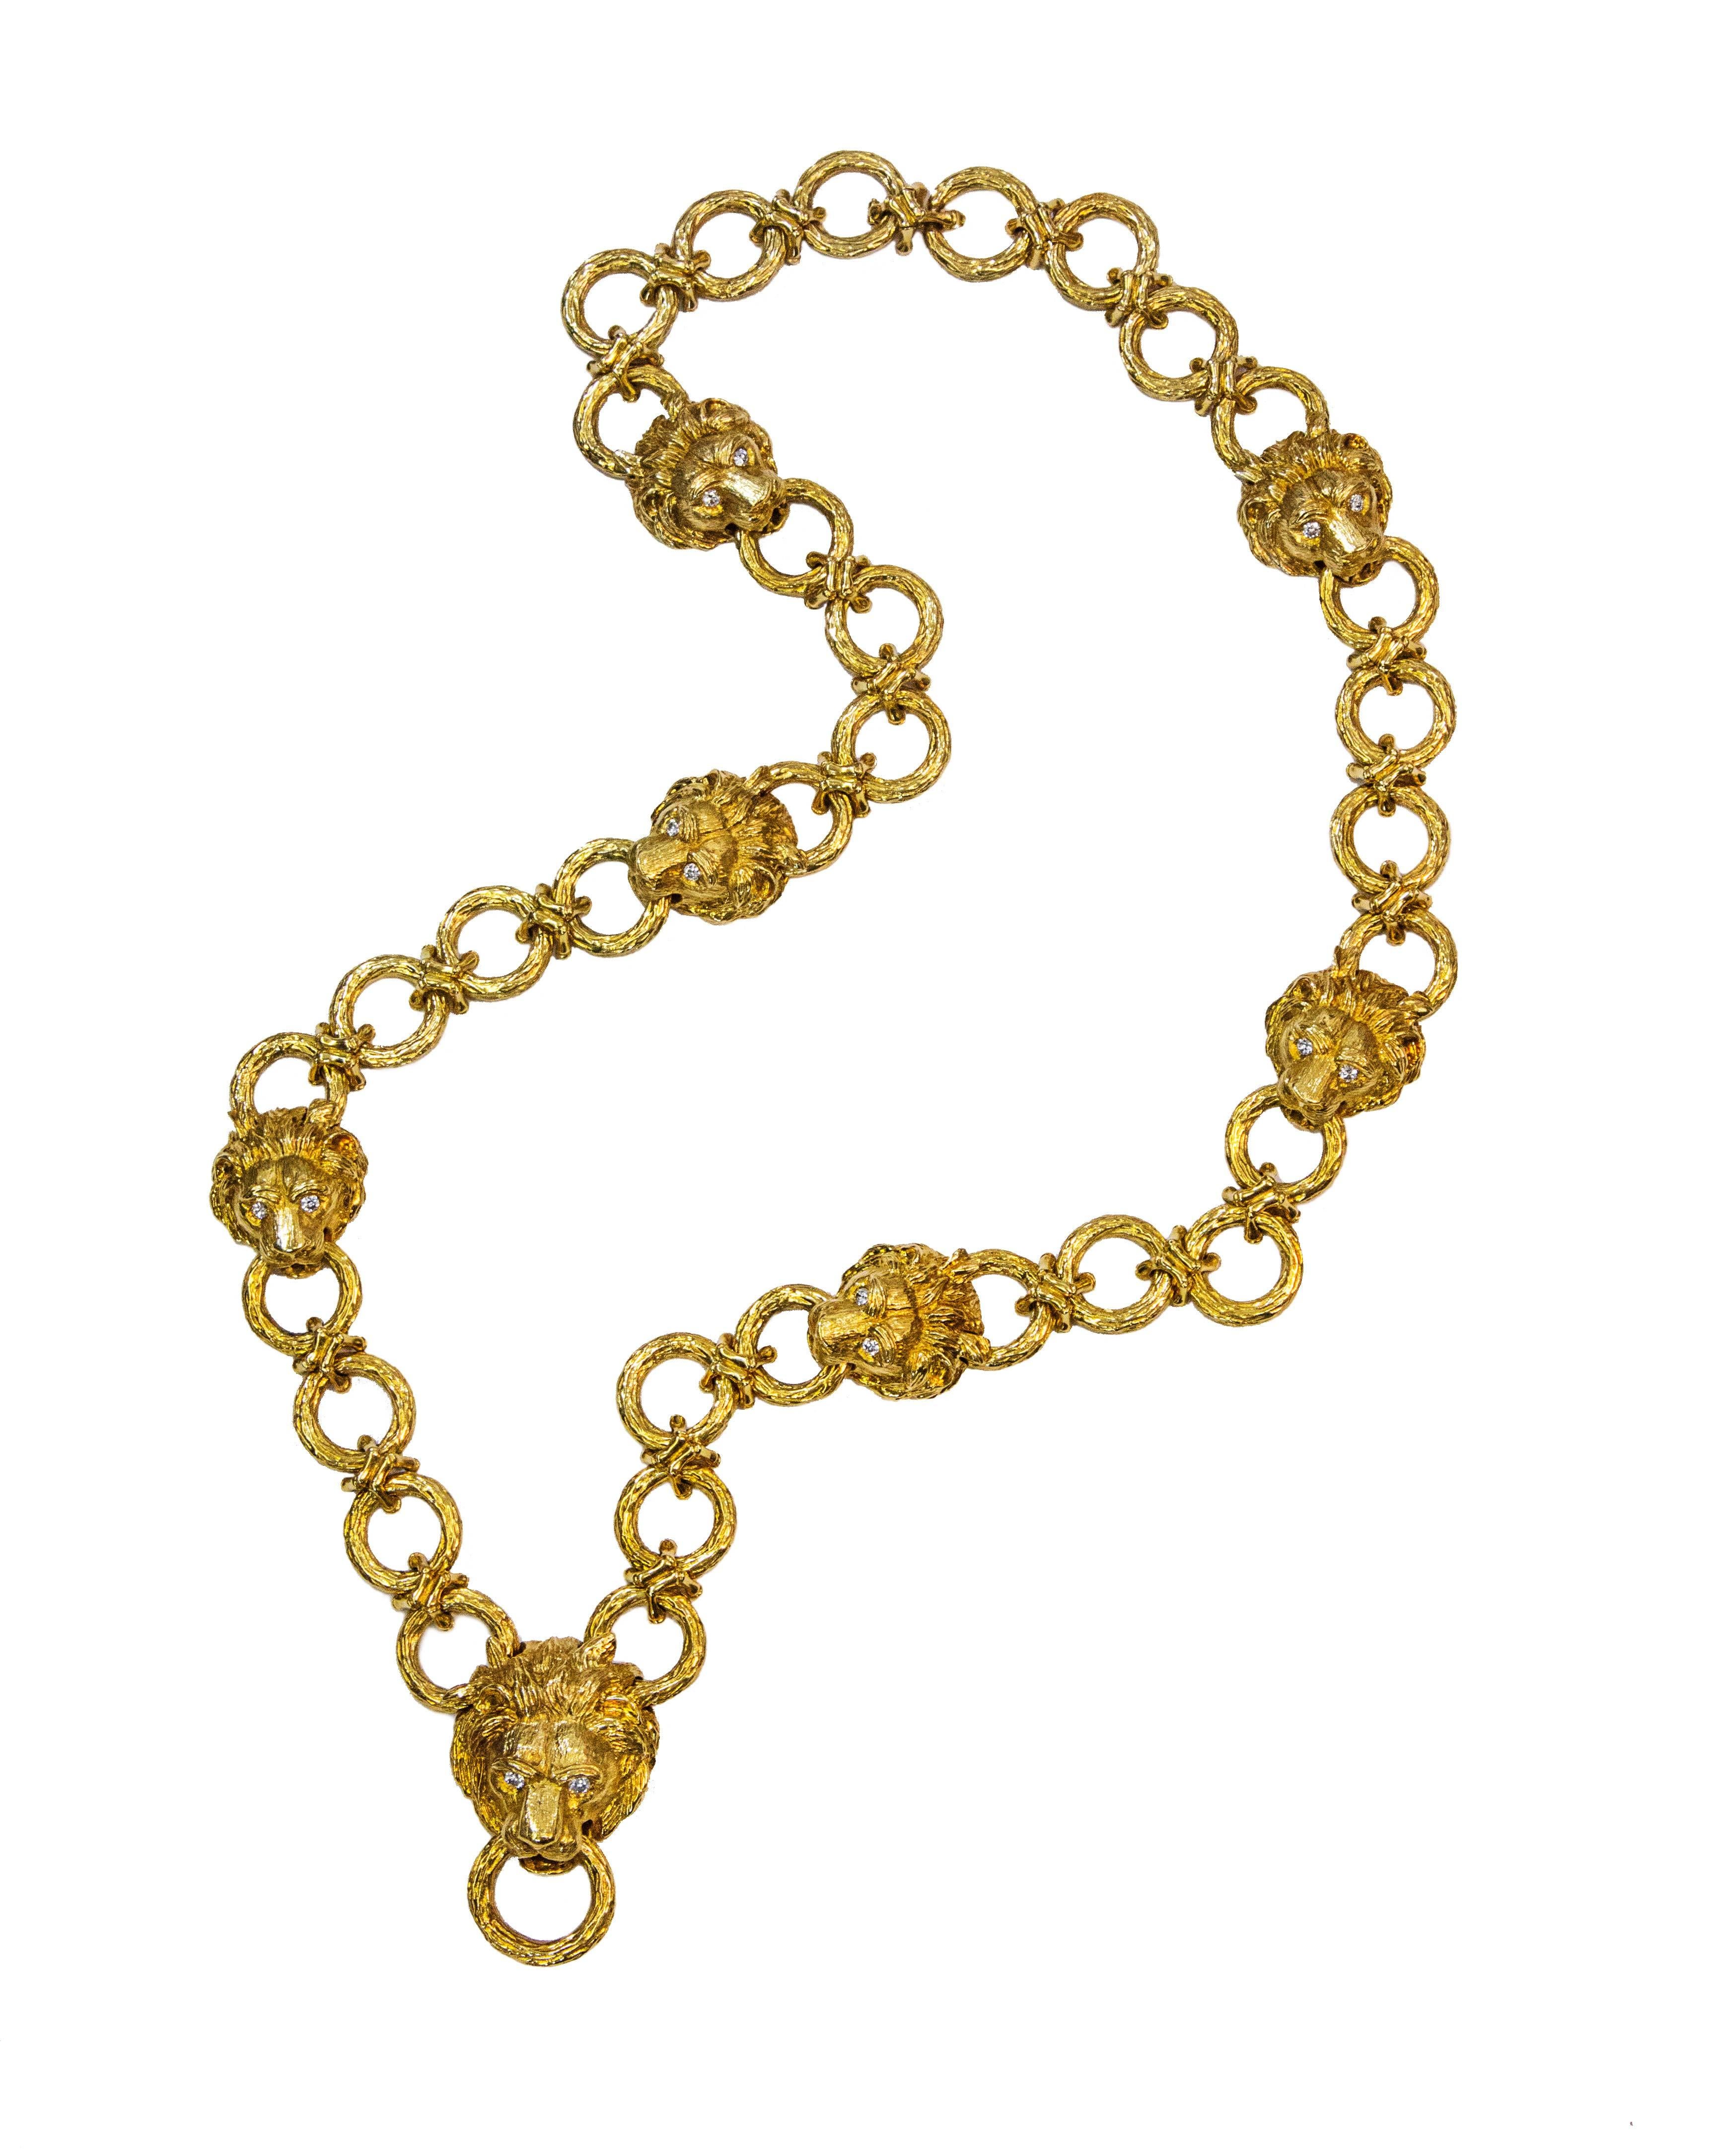 Made and signed by Van Cleef and Arpels approximately in the 1960's. The necklace, of long chain design, features hoops with seven lion heads throughout the necklace. The lion heads are set with fourteen round brilliant diamond eyes weighing 3.00